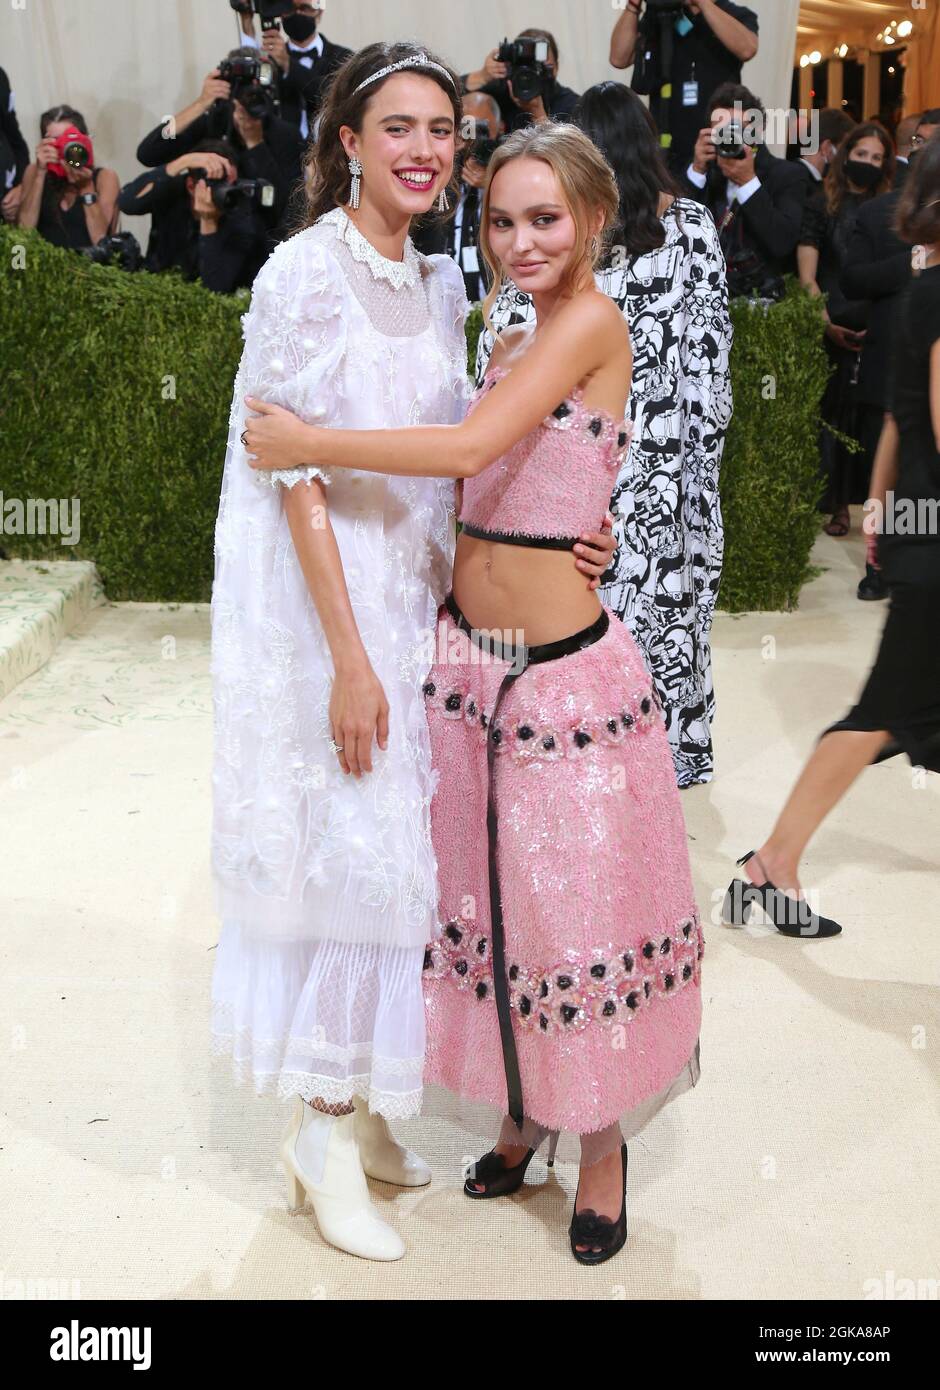 New York, USA. 13th Sep 2021. Lily Rose Depp and Margaret Qualley attending  the Metropolitan Museum of Art Costume Institute Benefit Gala 2021 in New  York City, NY, USA on September 13